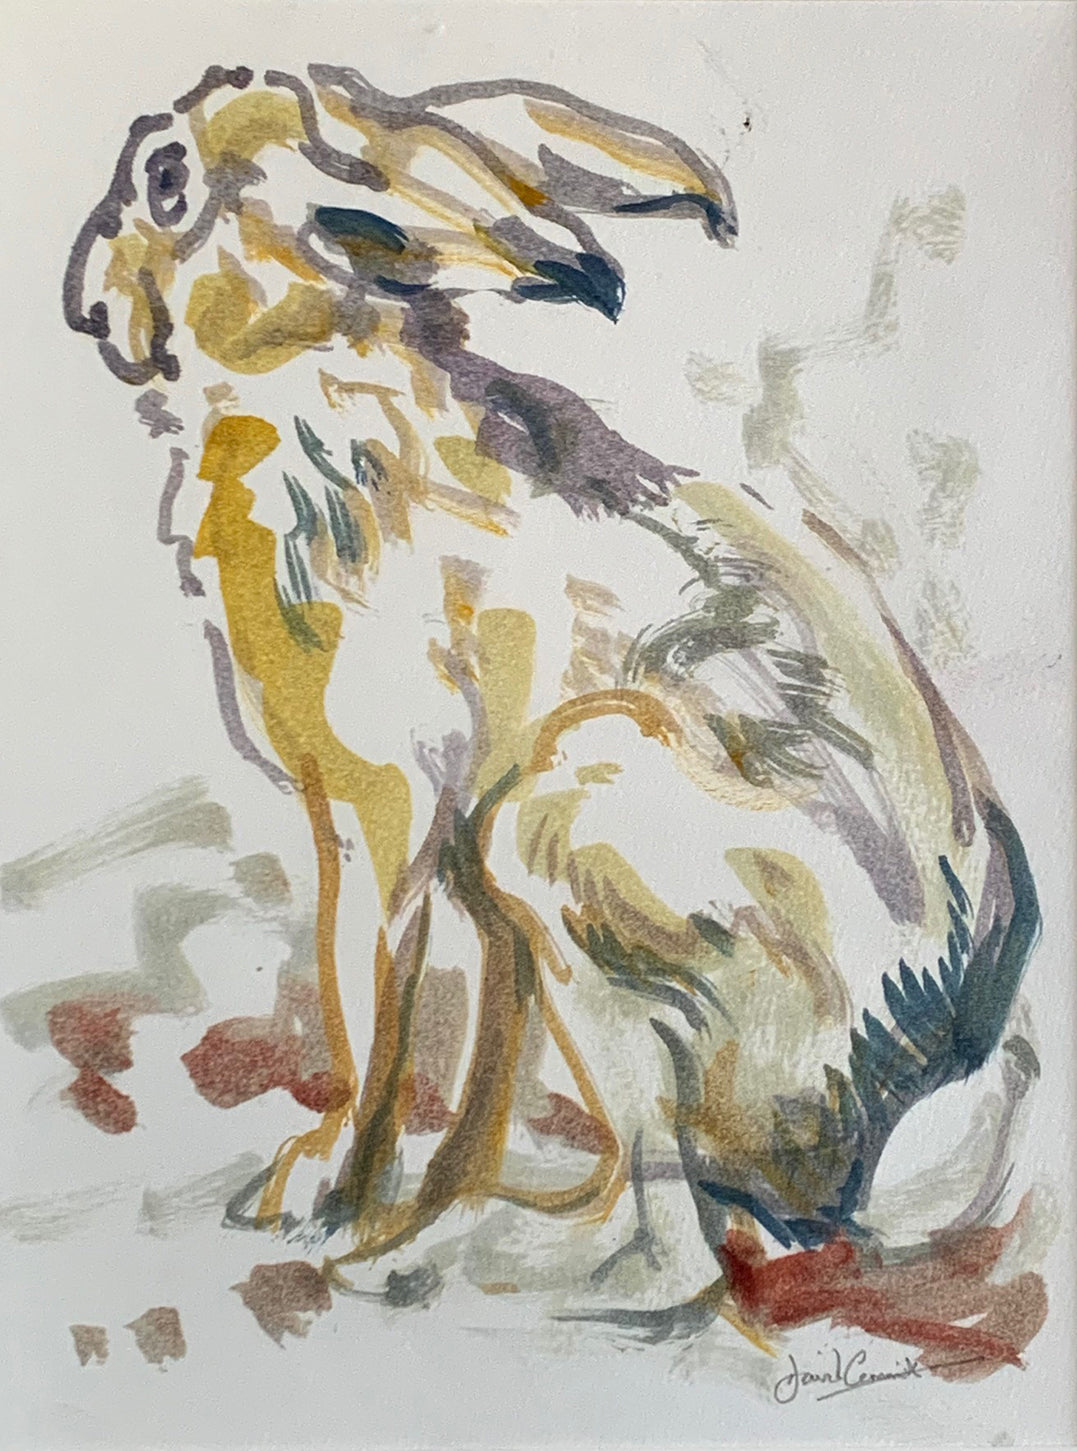 ‘Hare sitting’ - Original Oil on Paper by David Cemmick - 29 x 22cm